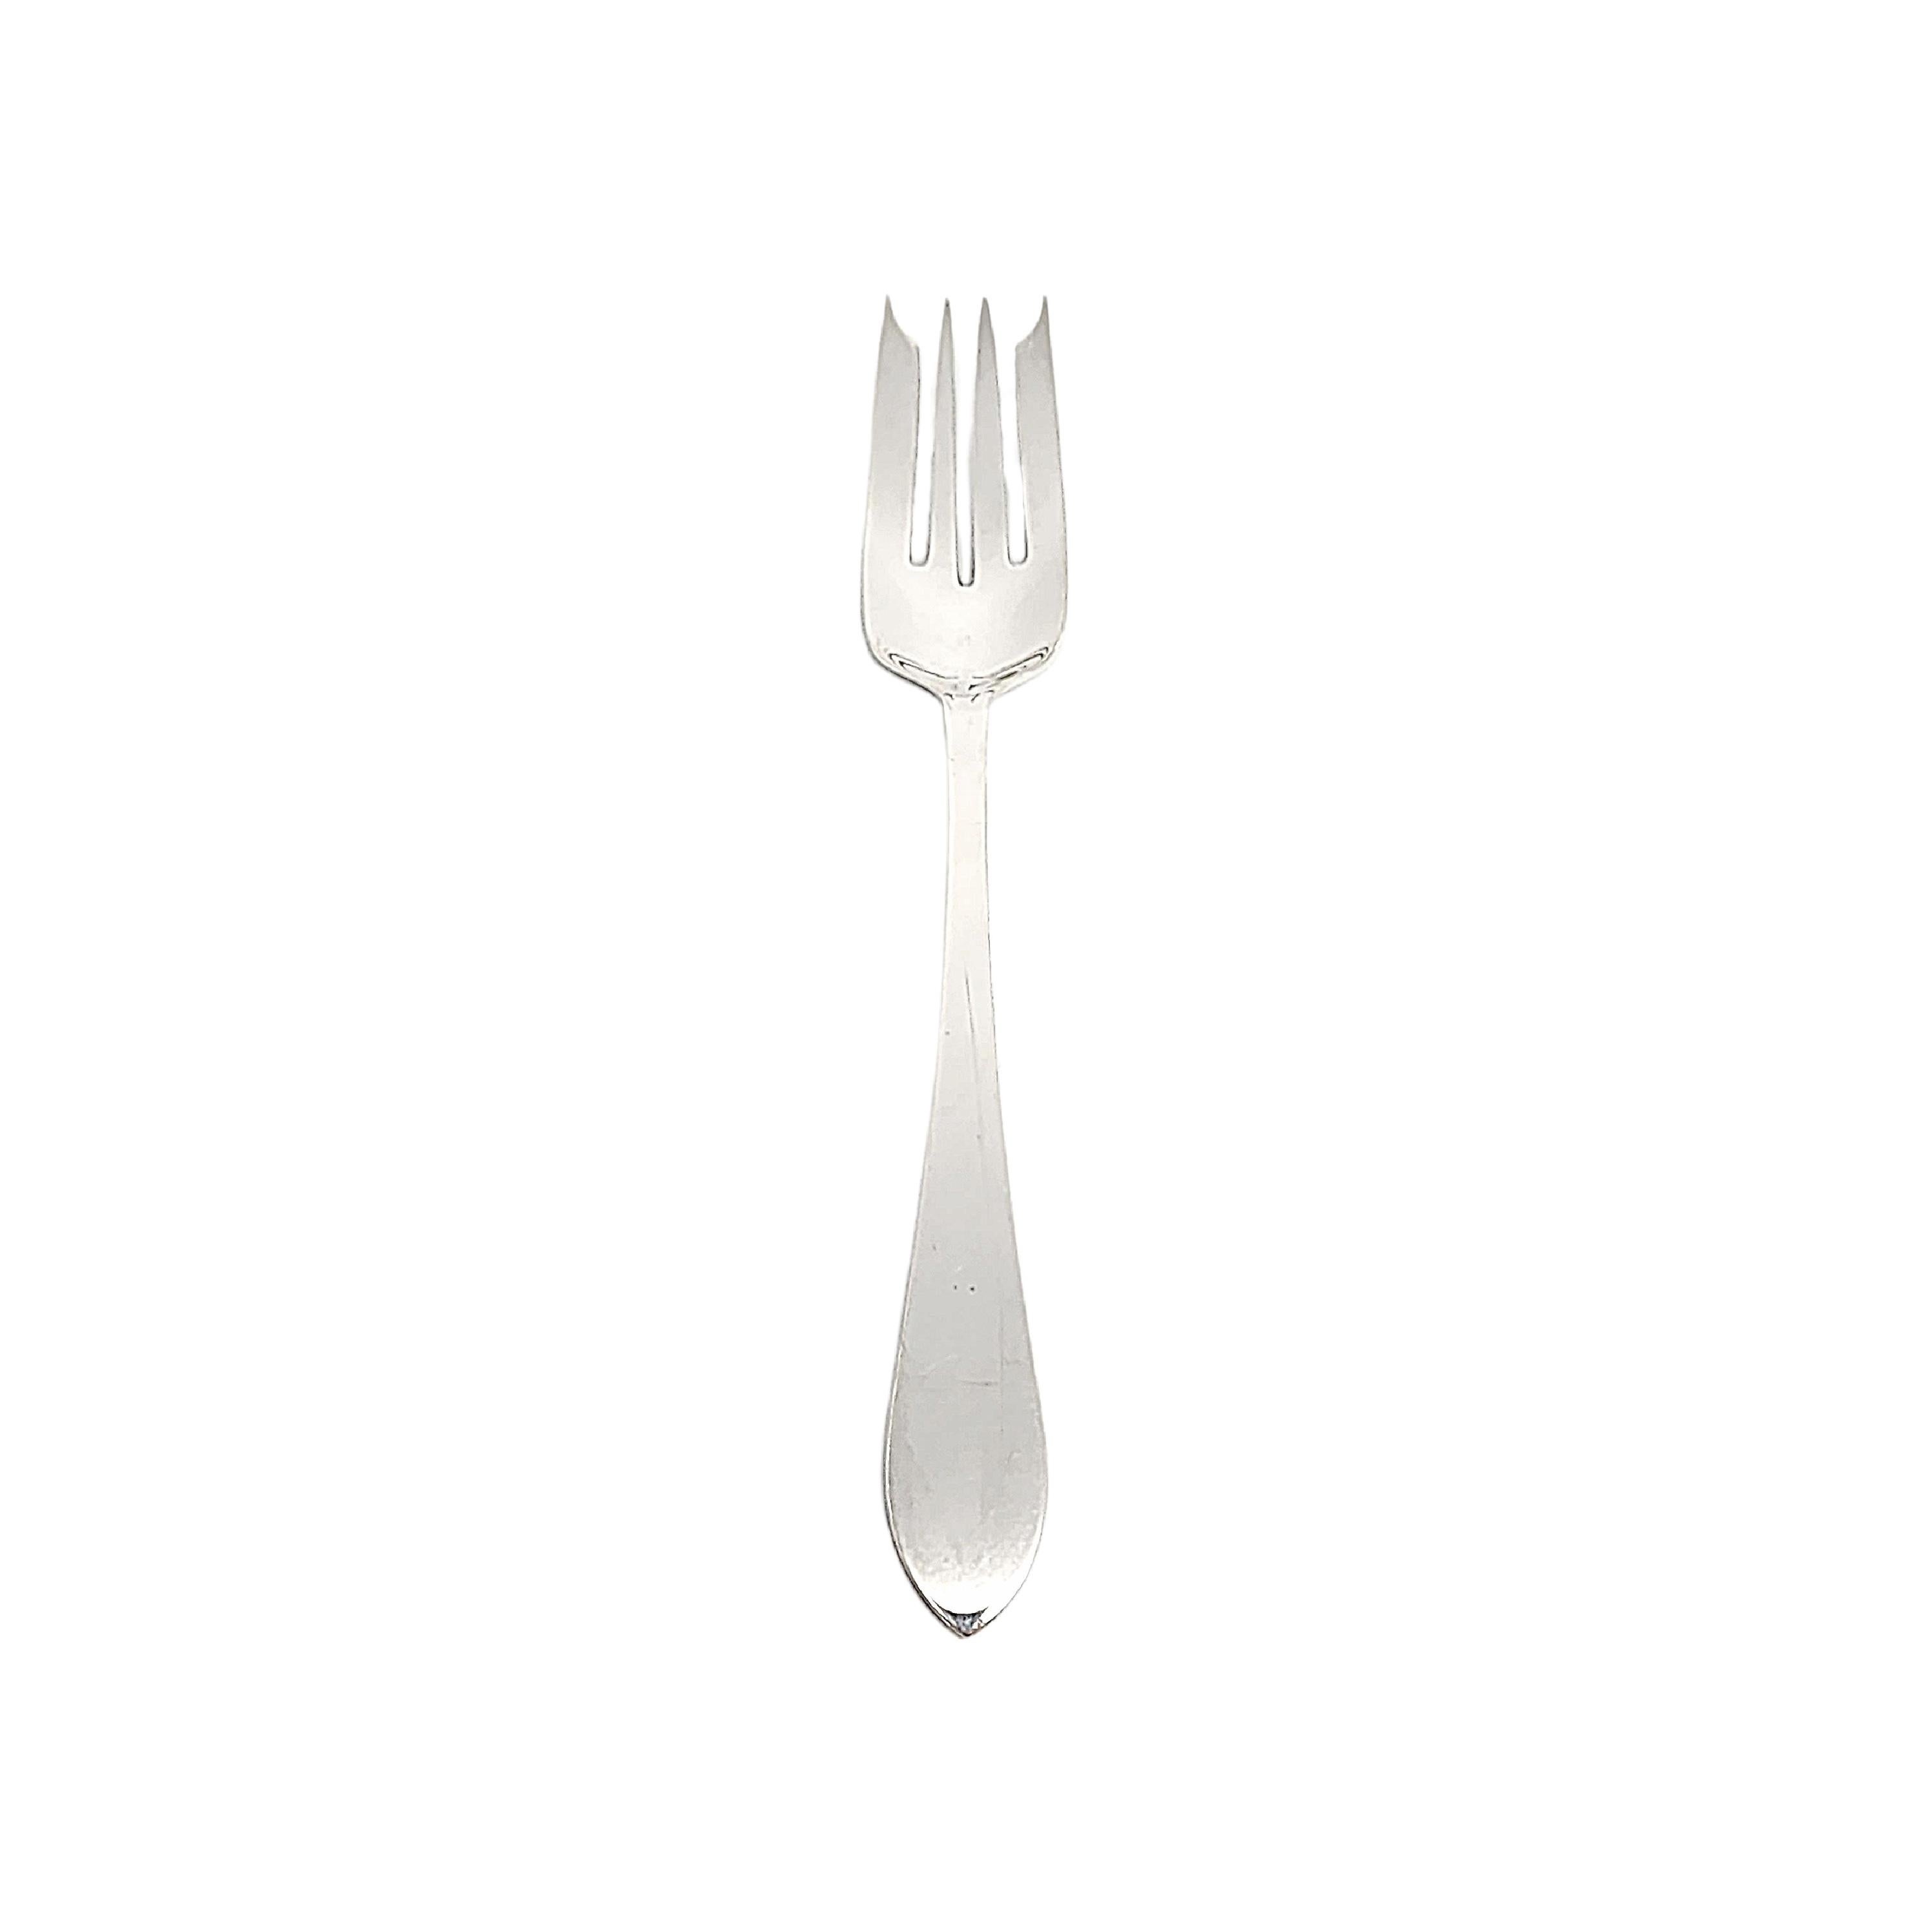 Tiffany & Co sterling silver salad fork in the Faneuil pattern.

No monogram or engraving.

The Faneuil pattern was in production from 1910-1955 and was named for Faneuil Hall in Boston, MA. The pattern's simple and elegant design makes it a